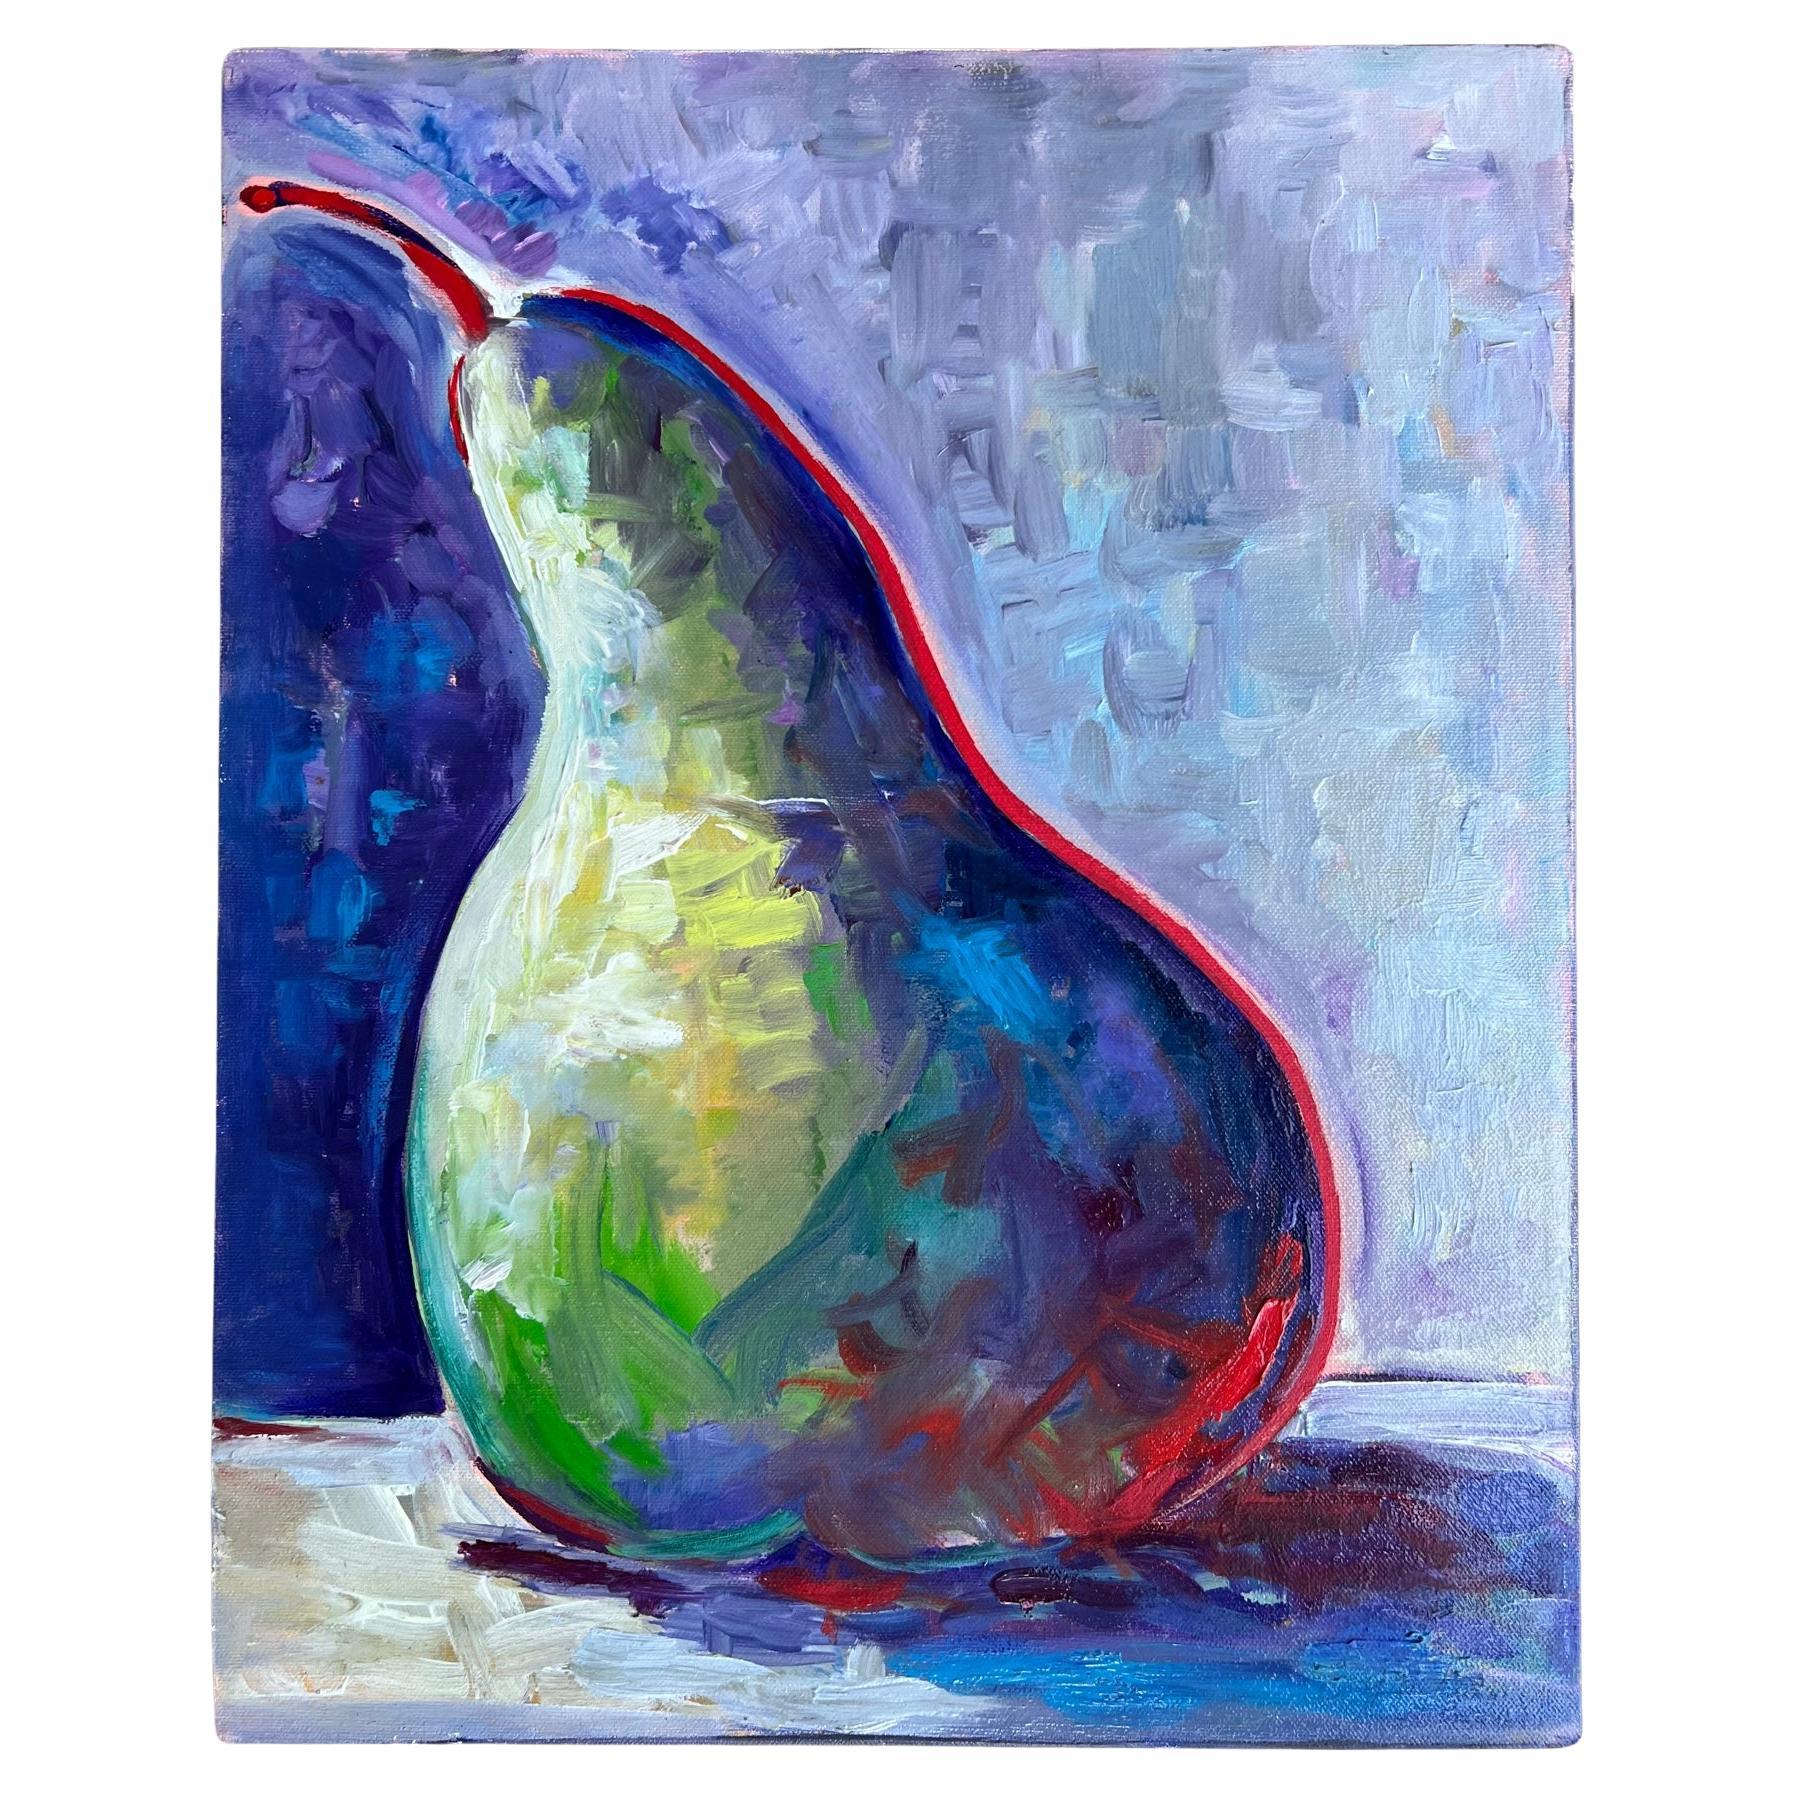 Pear Still Life Oil Painting Signed by Artist